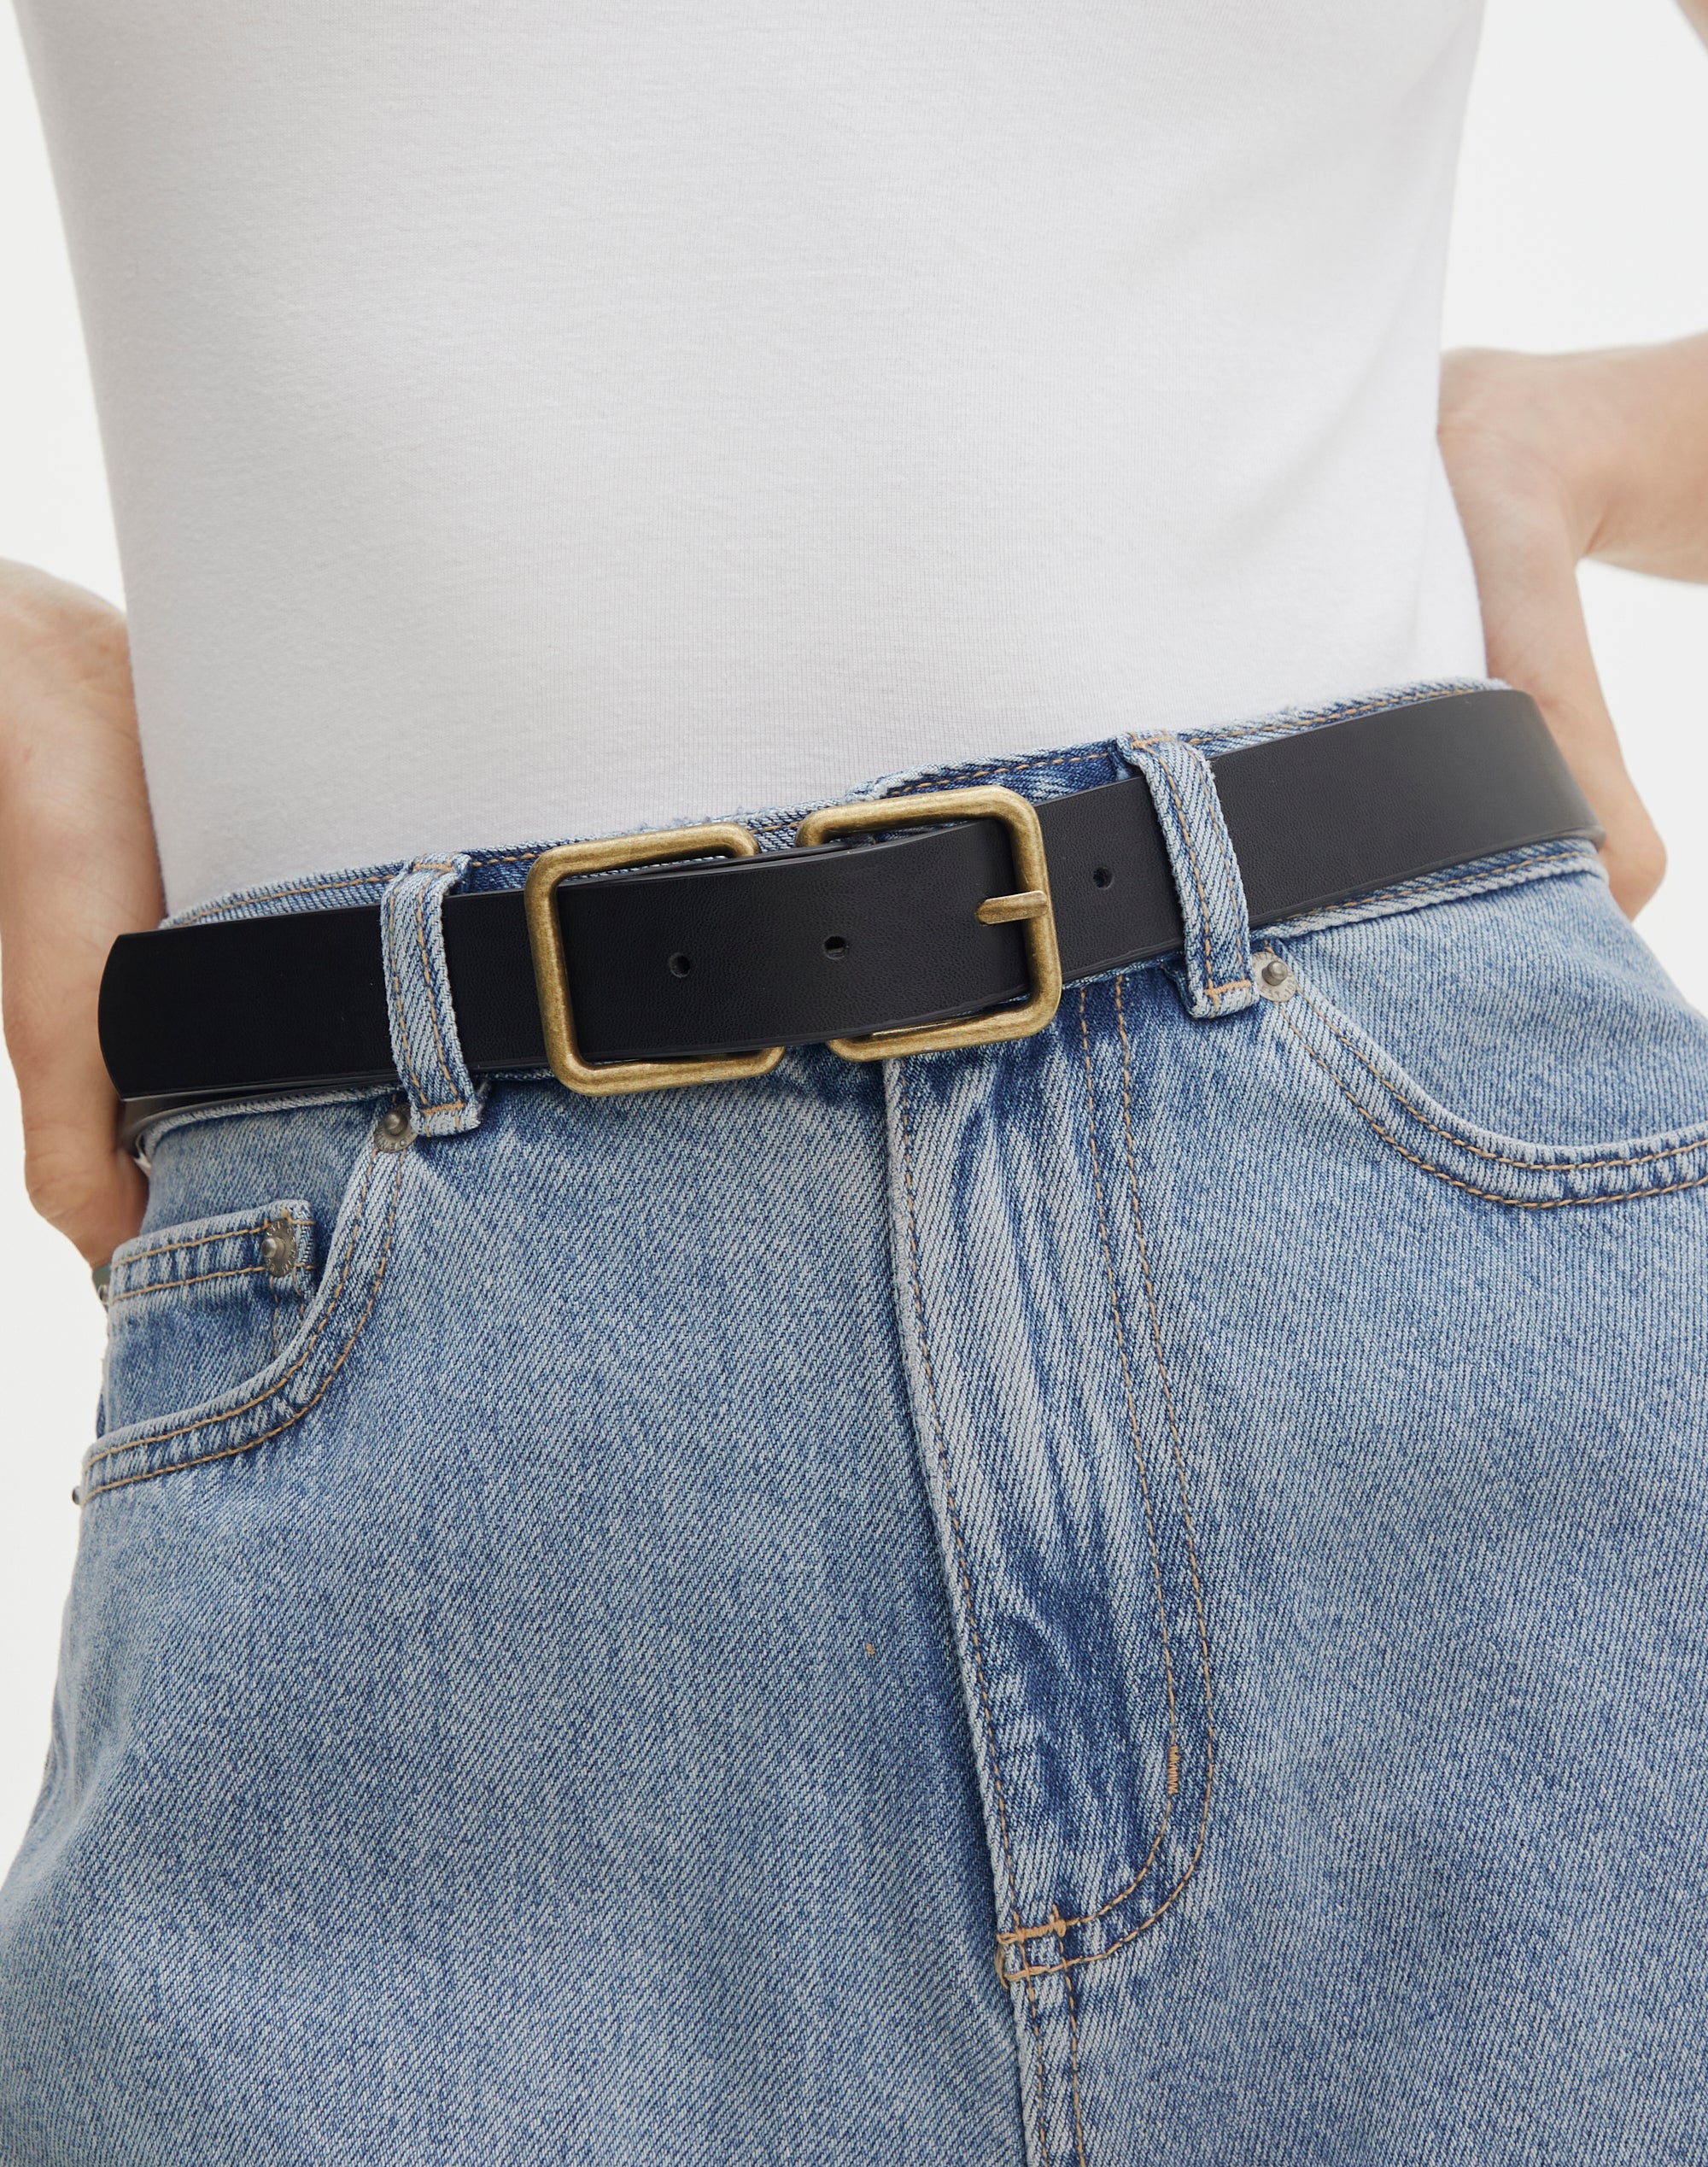 Double Ring Belt in Black/gold